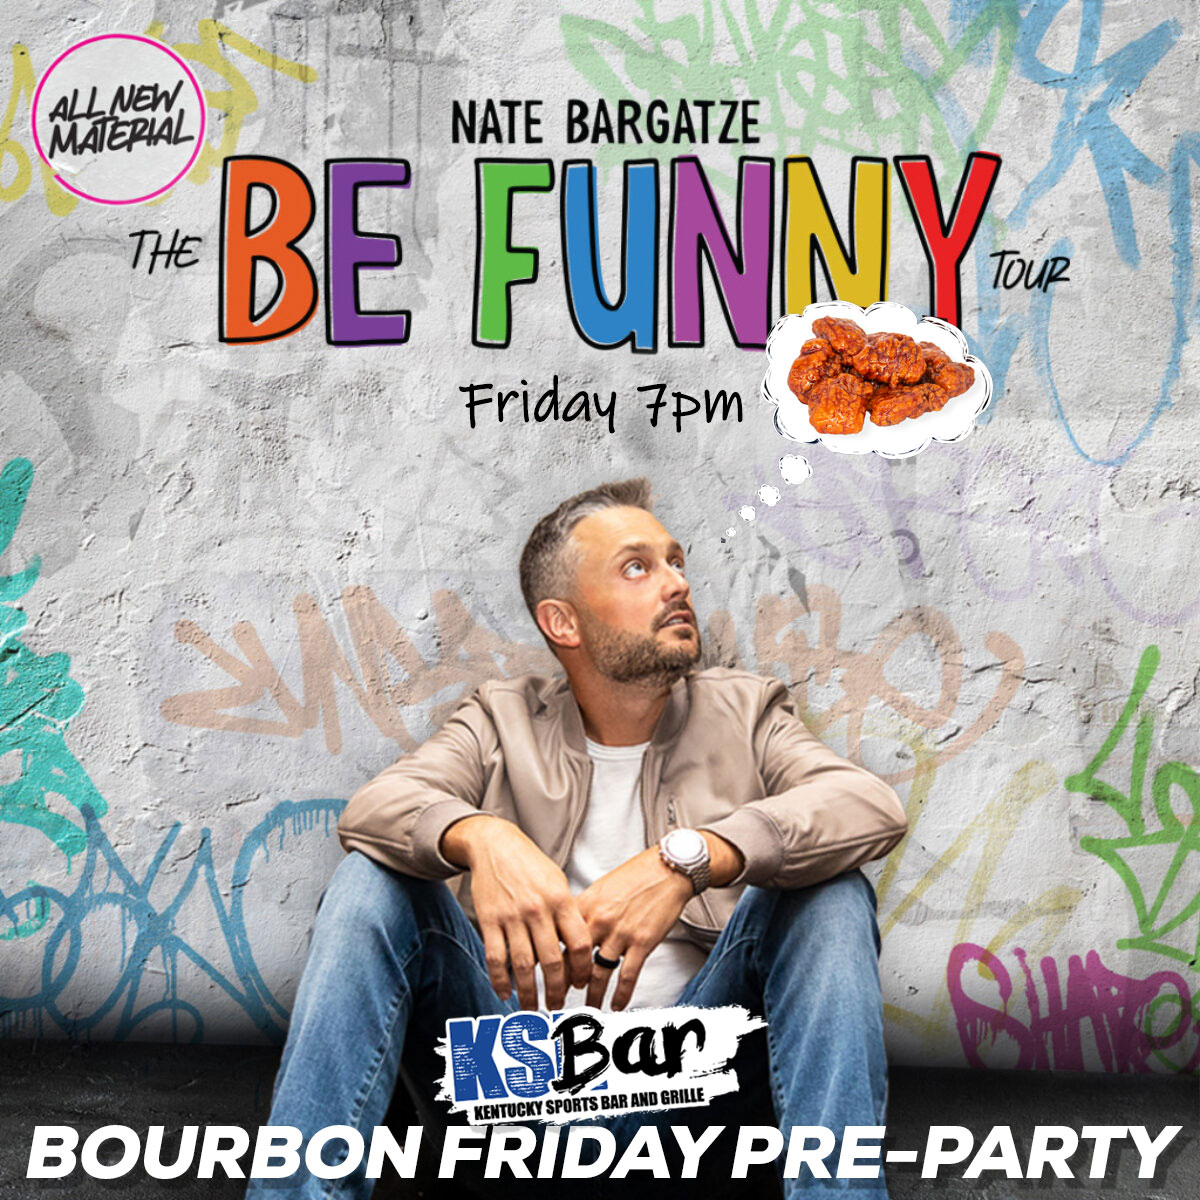 TONIGHT: Nate Bargatze takes over Rupp Arena, marking the only time a Tennessean has been able to do that. We'll have Bourbon specials all day. But no iced coffee whipped cream. IYKYK